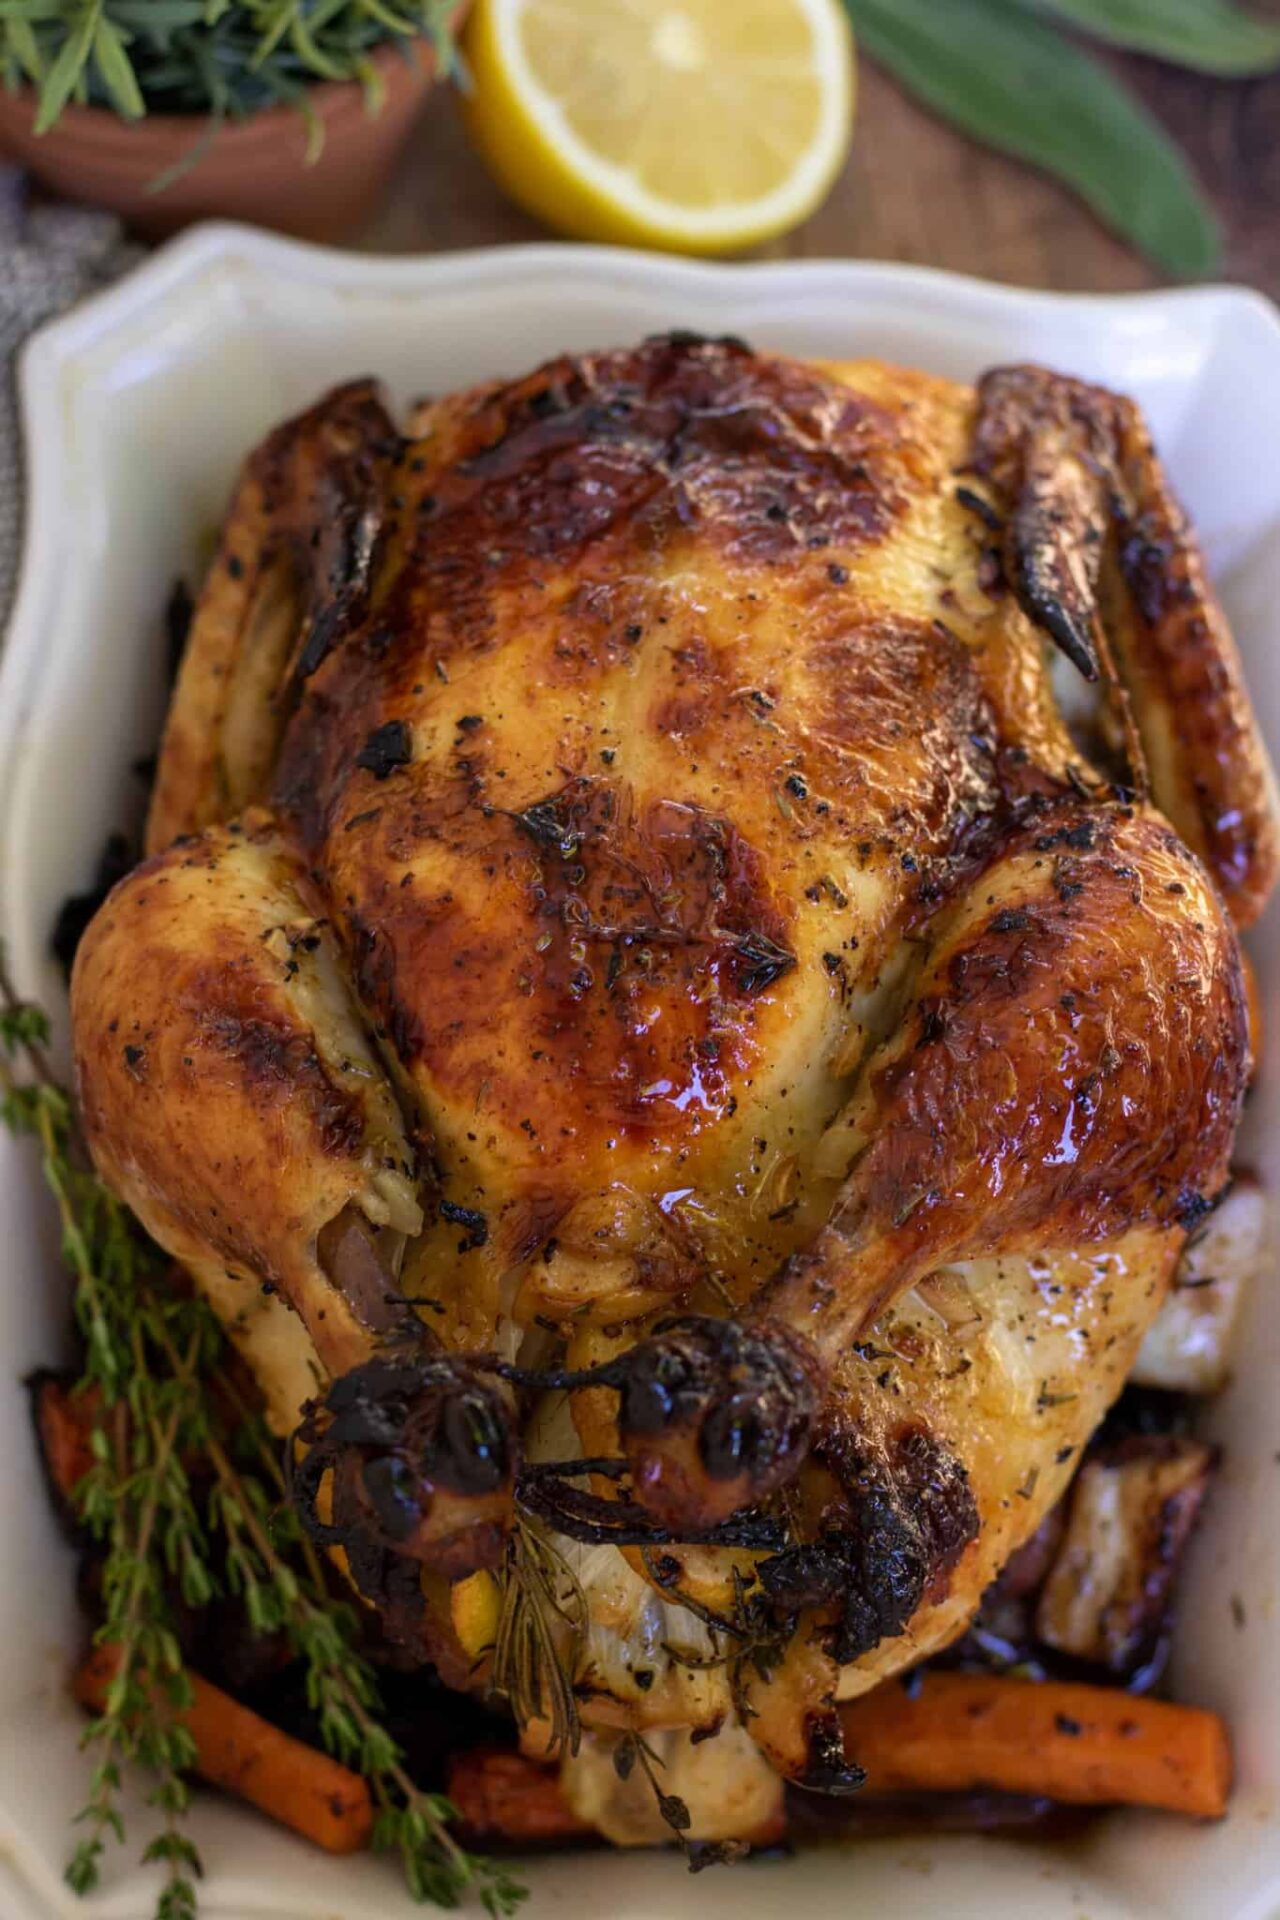 A whole roasted chicken on square white serving dish. The legs are tied up and the skin is browned and golden. There's a bunch of fresh rosemary and thyme next to the chicken and it's sitting on top of carrots, potatoes and onions.